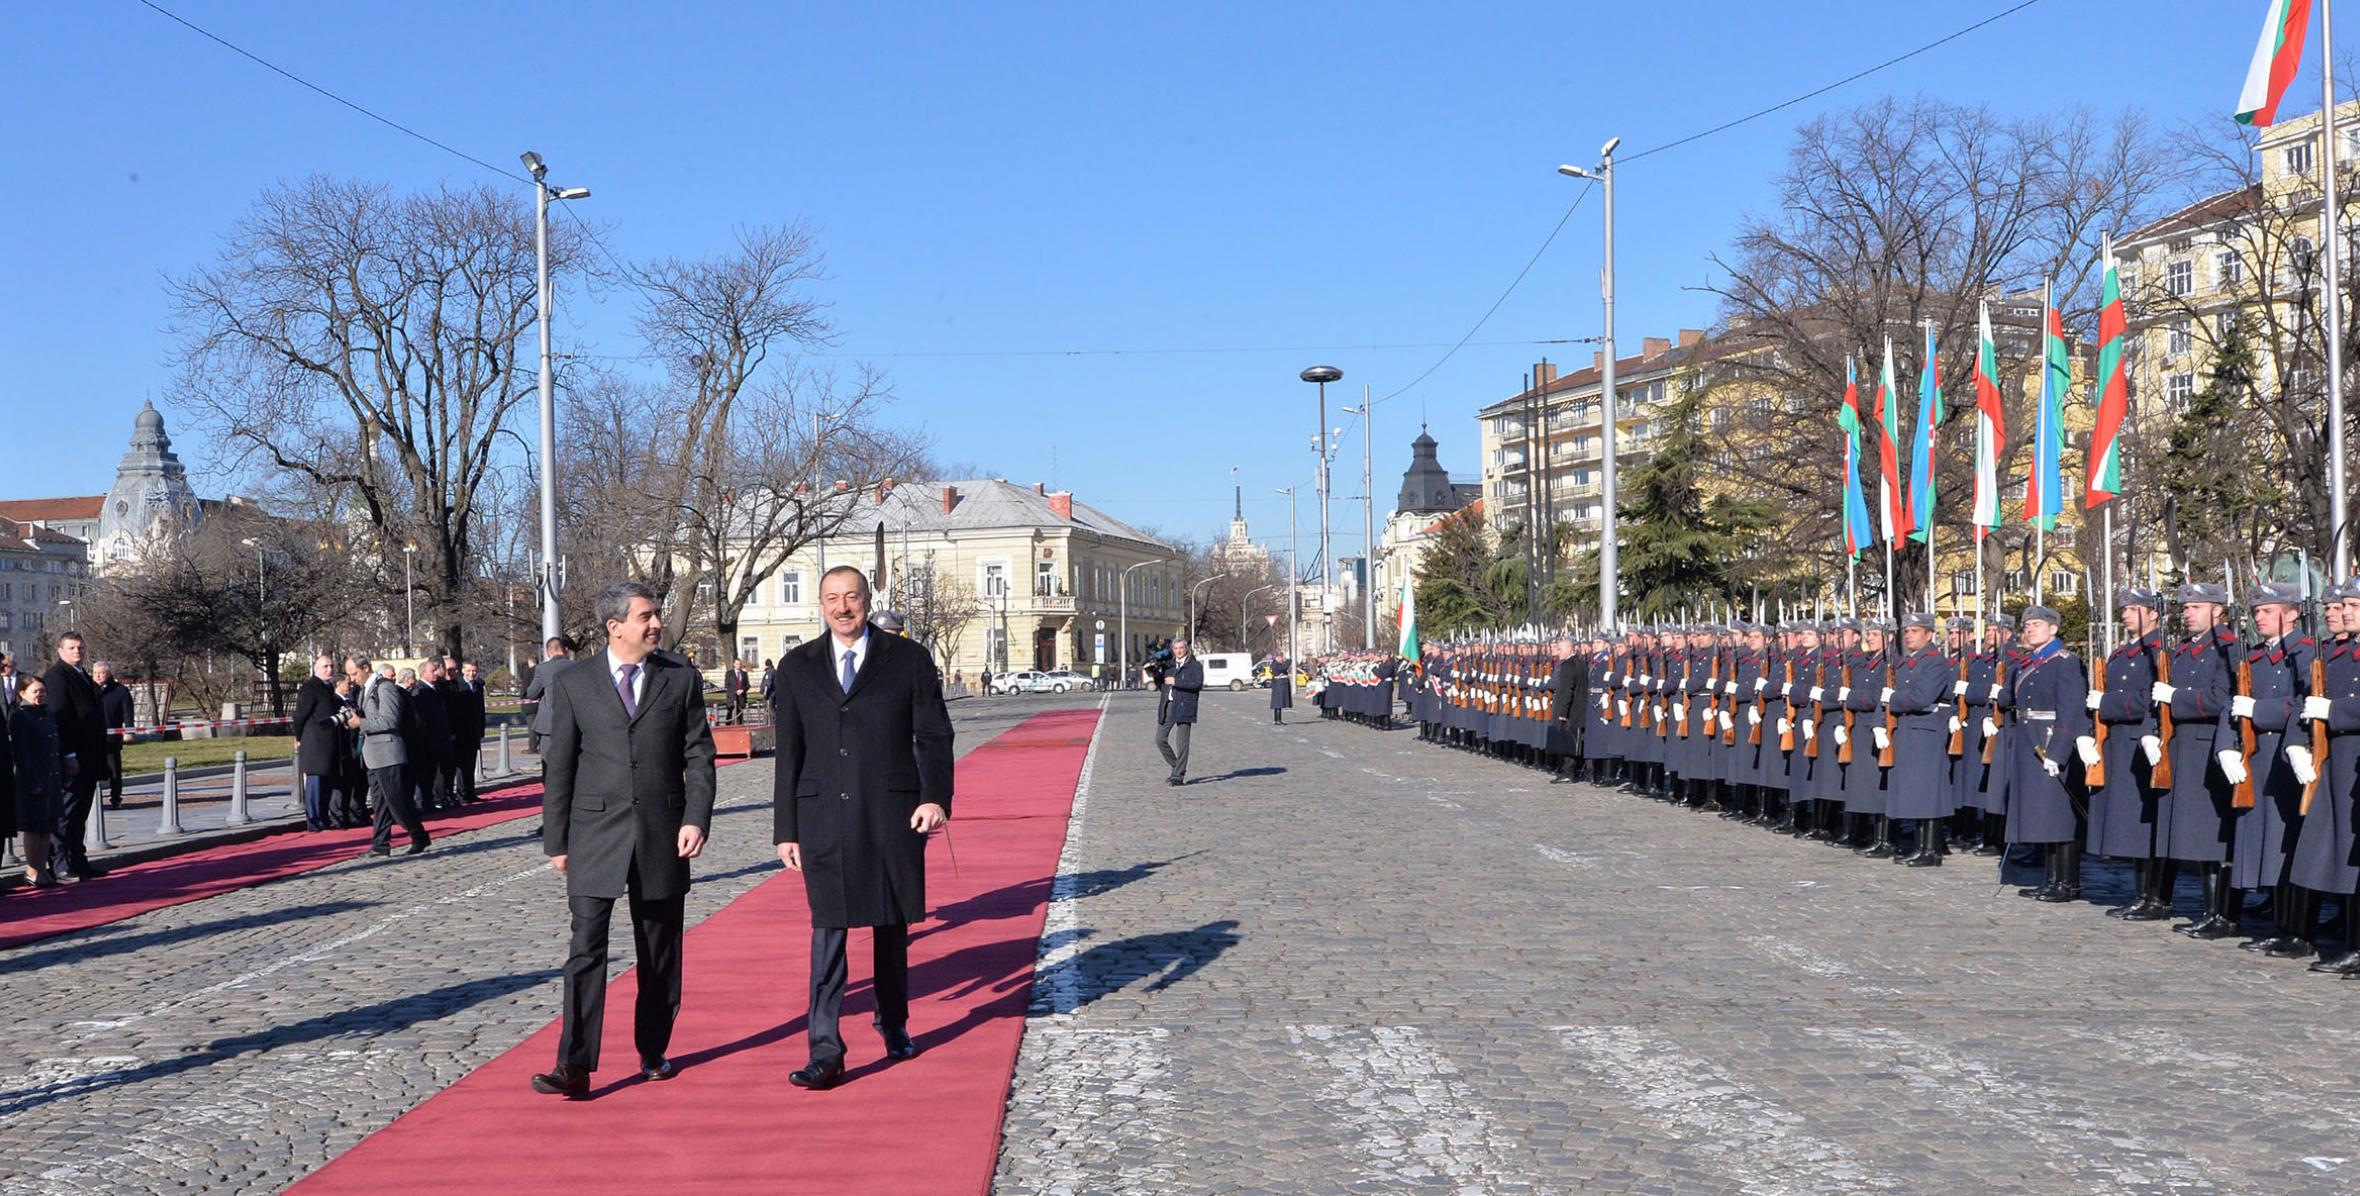 Official welcoming ceremony for President Ilham Aliyev was held in Sofia